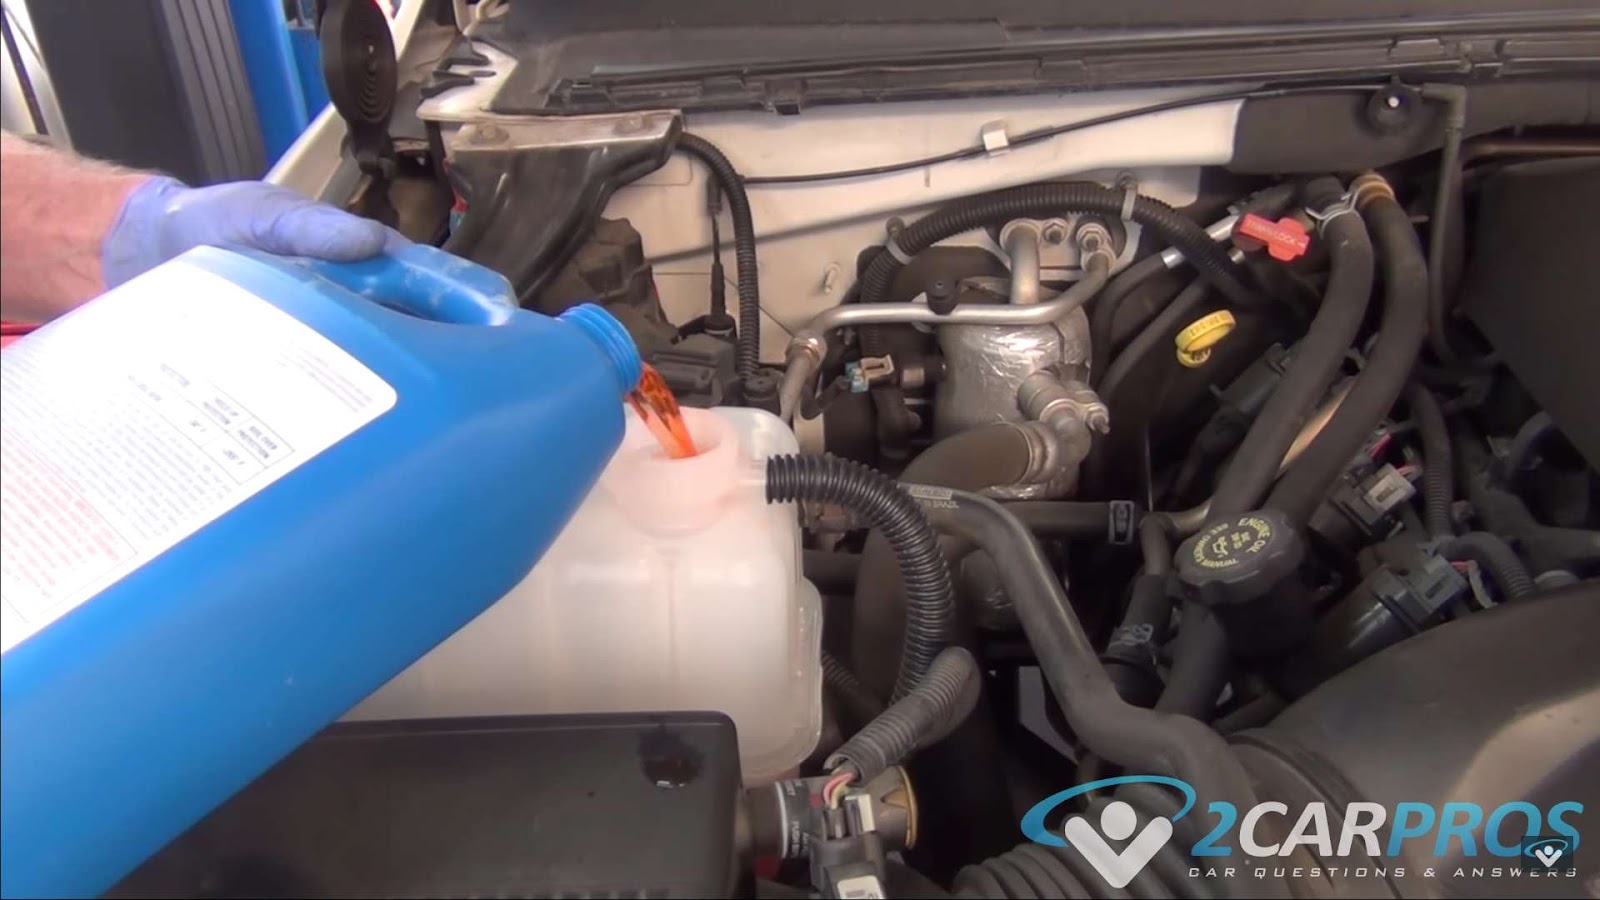 Process of add coolant to car